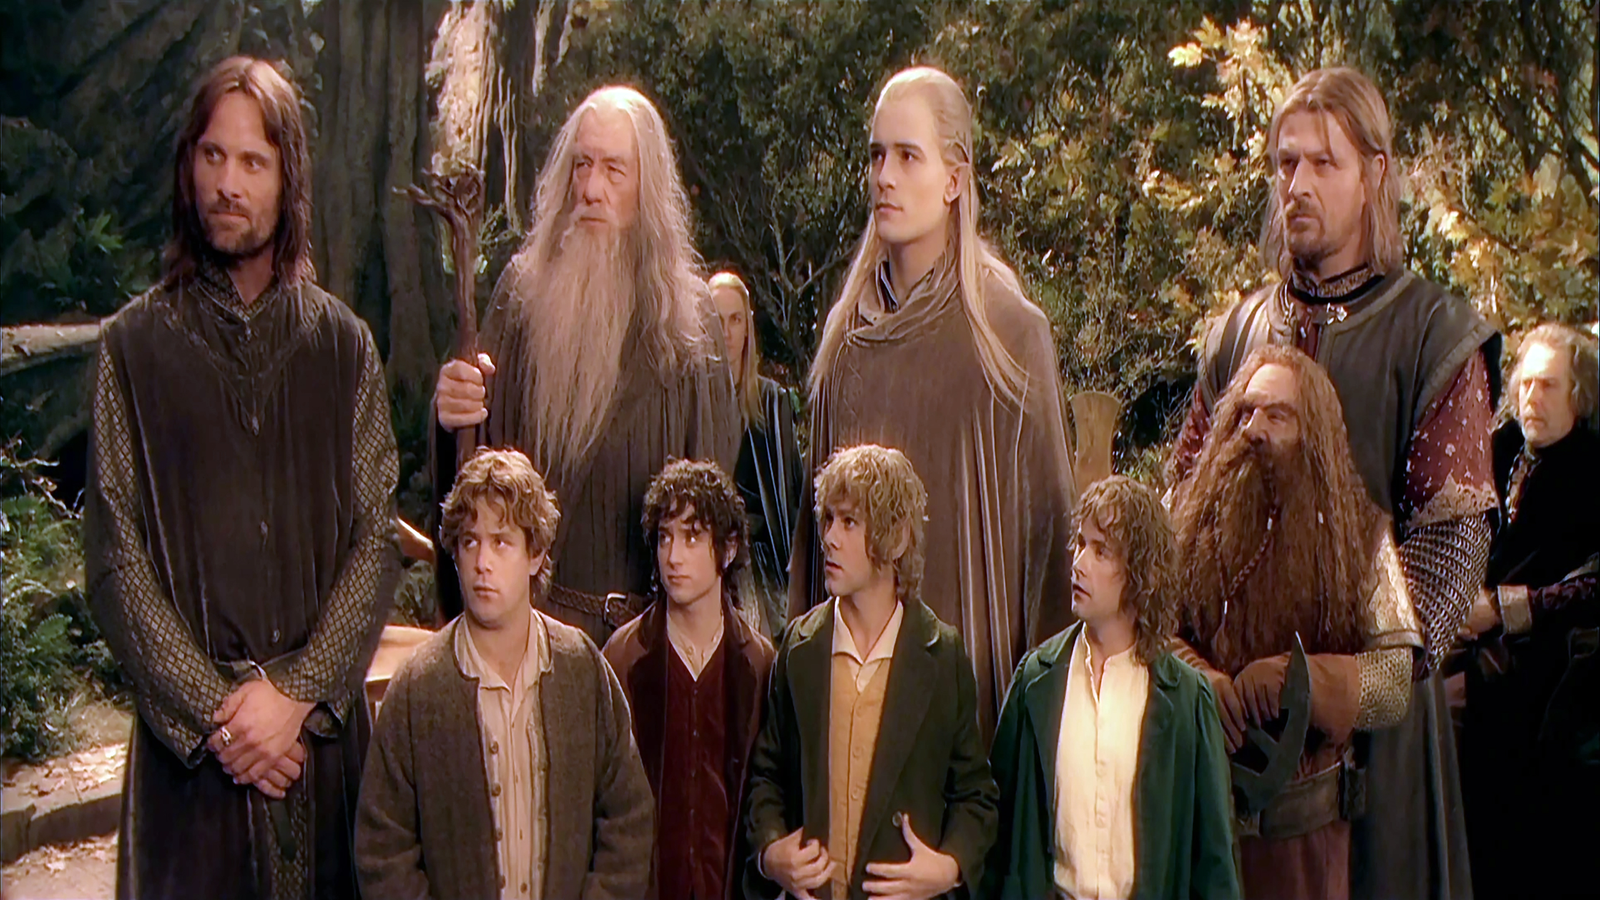 The Lord Of The Rings